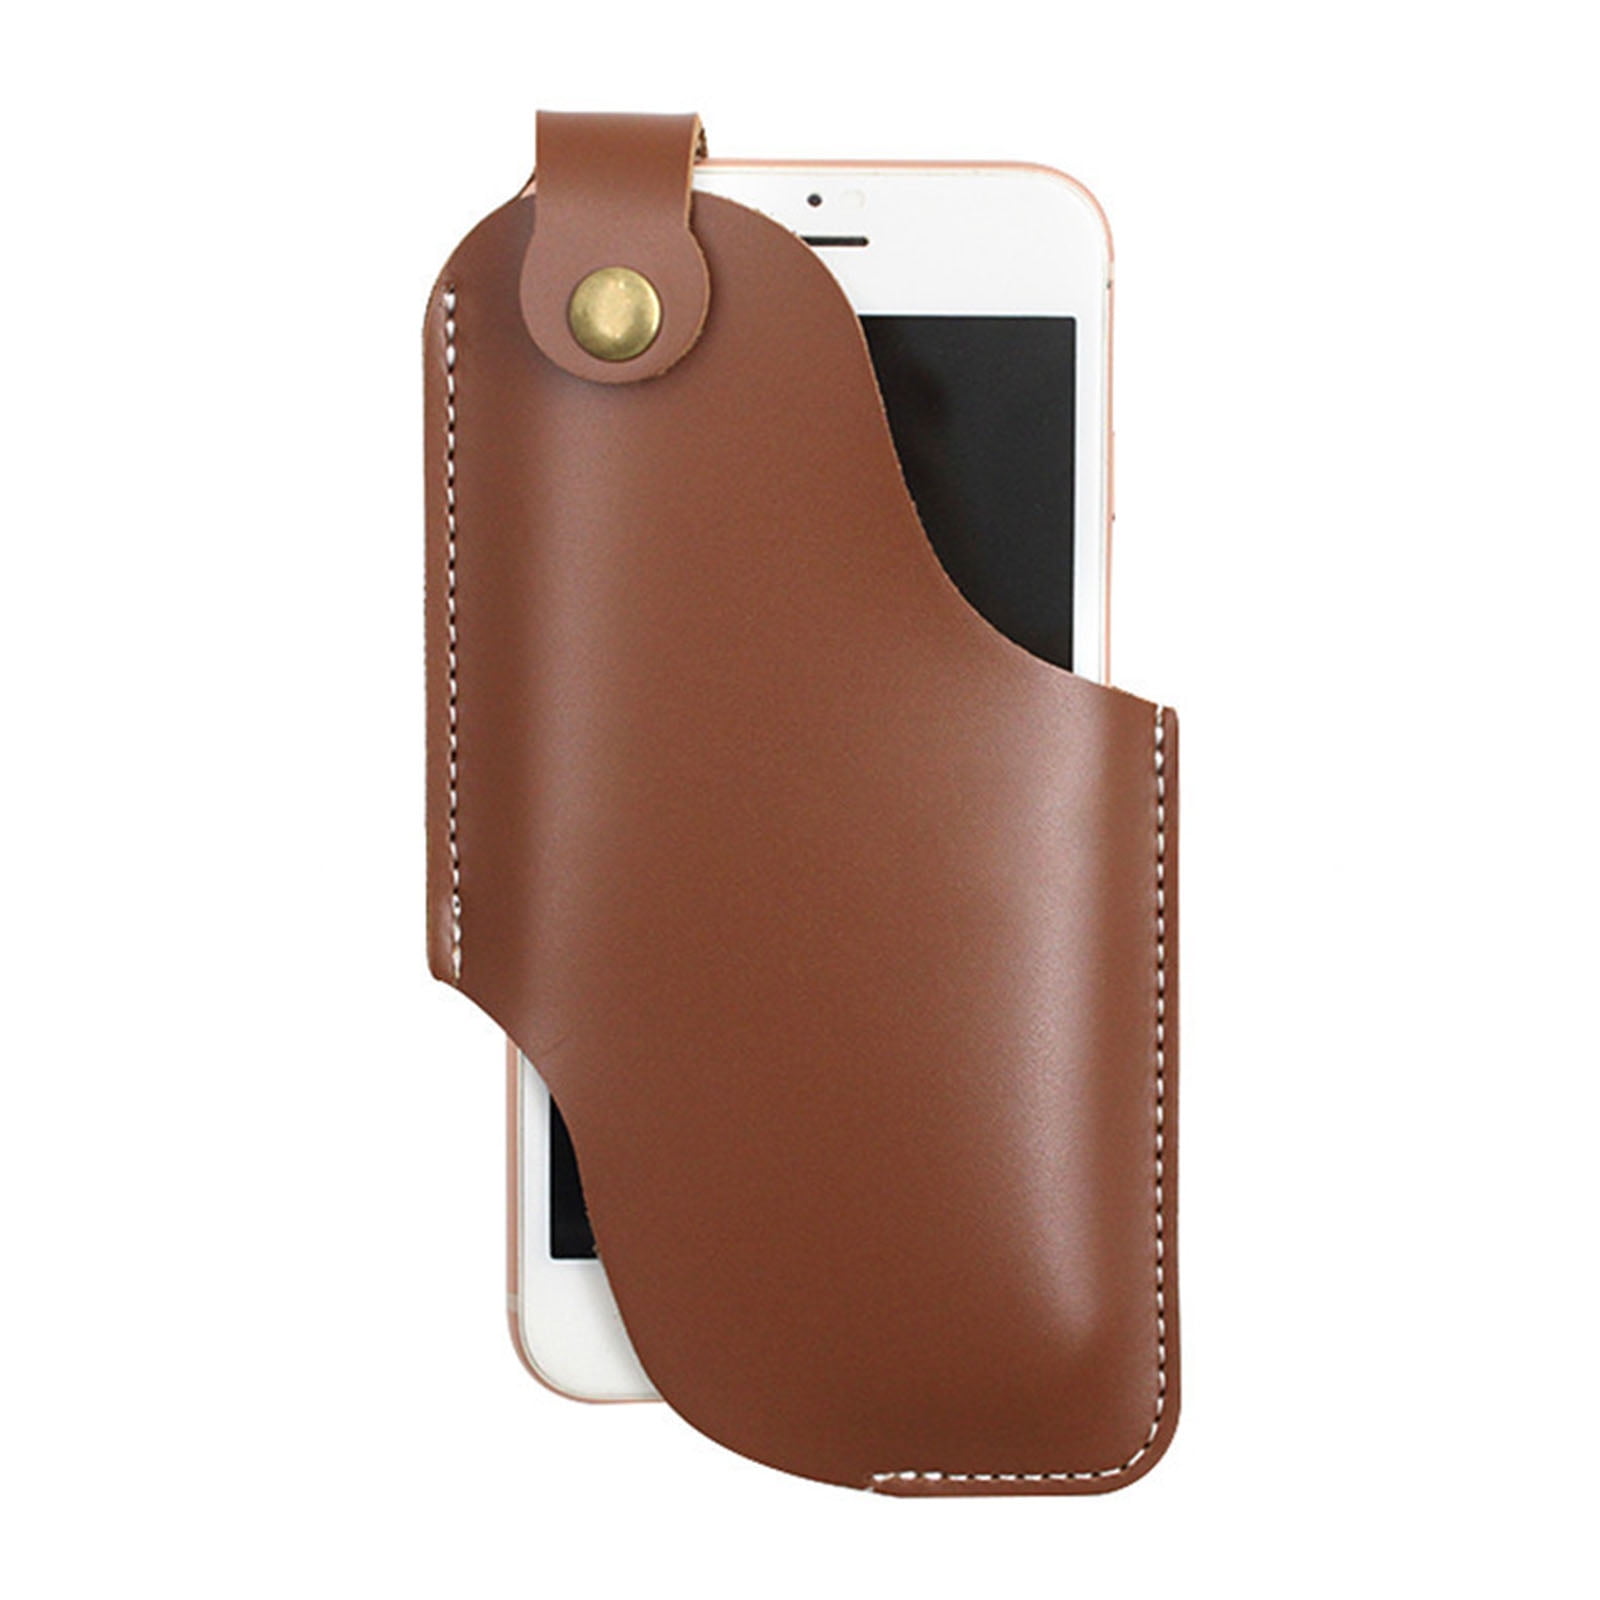 Gentlestache Leather Cell Phone for Belt,Phone Case Leather, Belt Cell  Phone Holder, Leather Phone Pouch